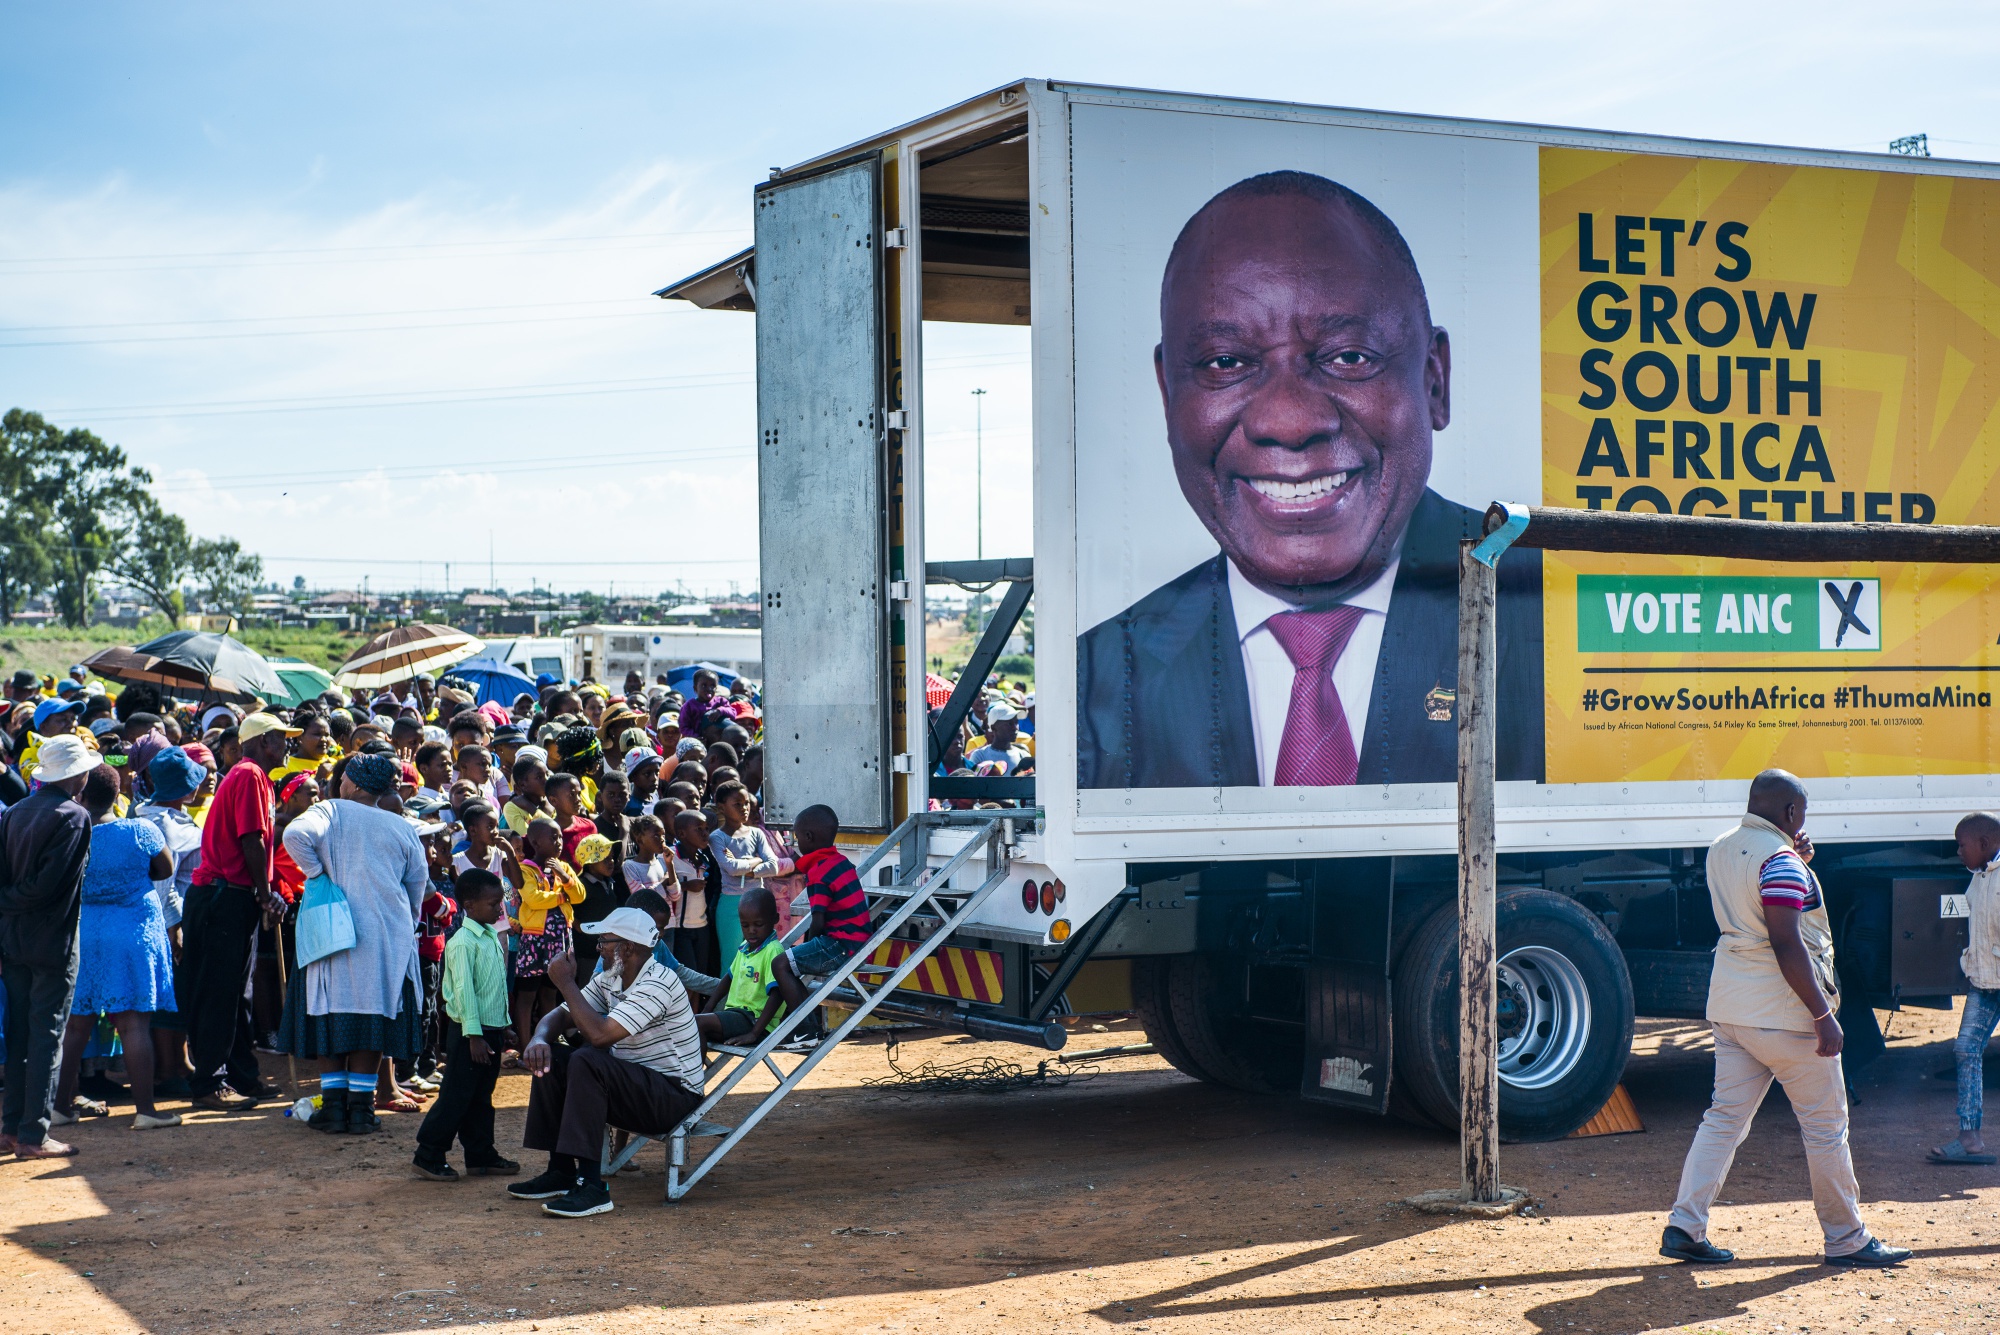 The face of Cyril Ramaphosa, South Africa's president, is displayed on the side of a campaign truck during an ANC campaign event in Bloemfontein on April 7.